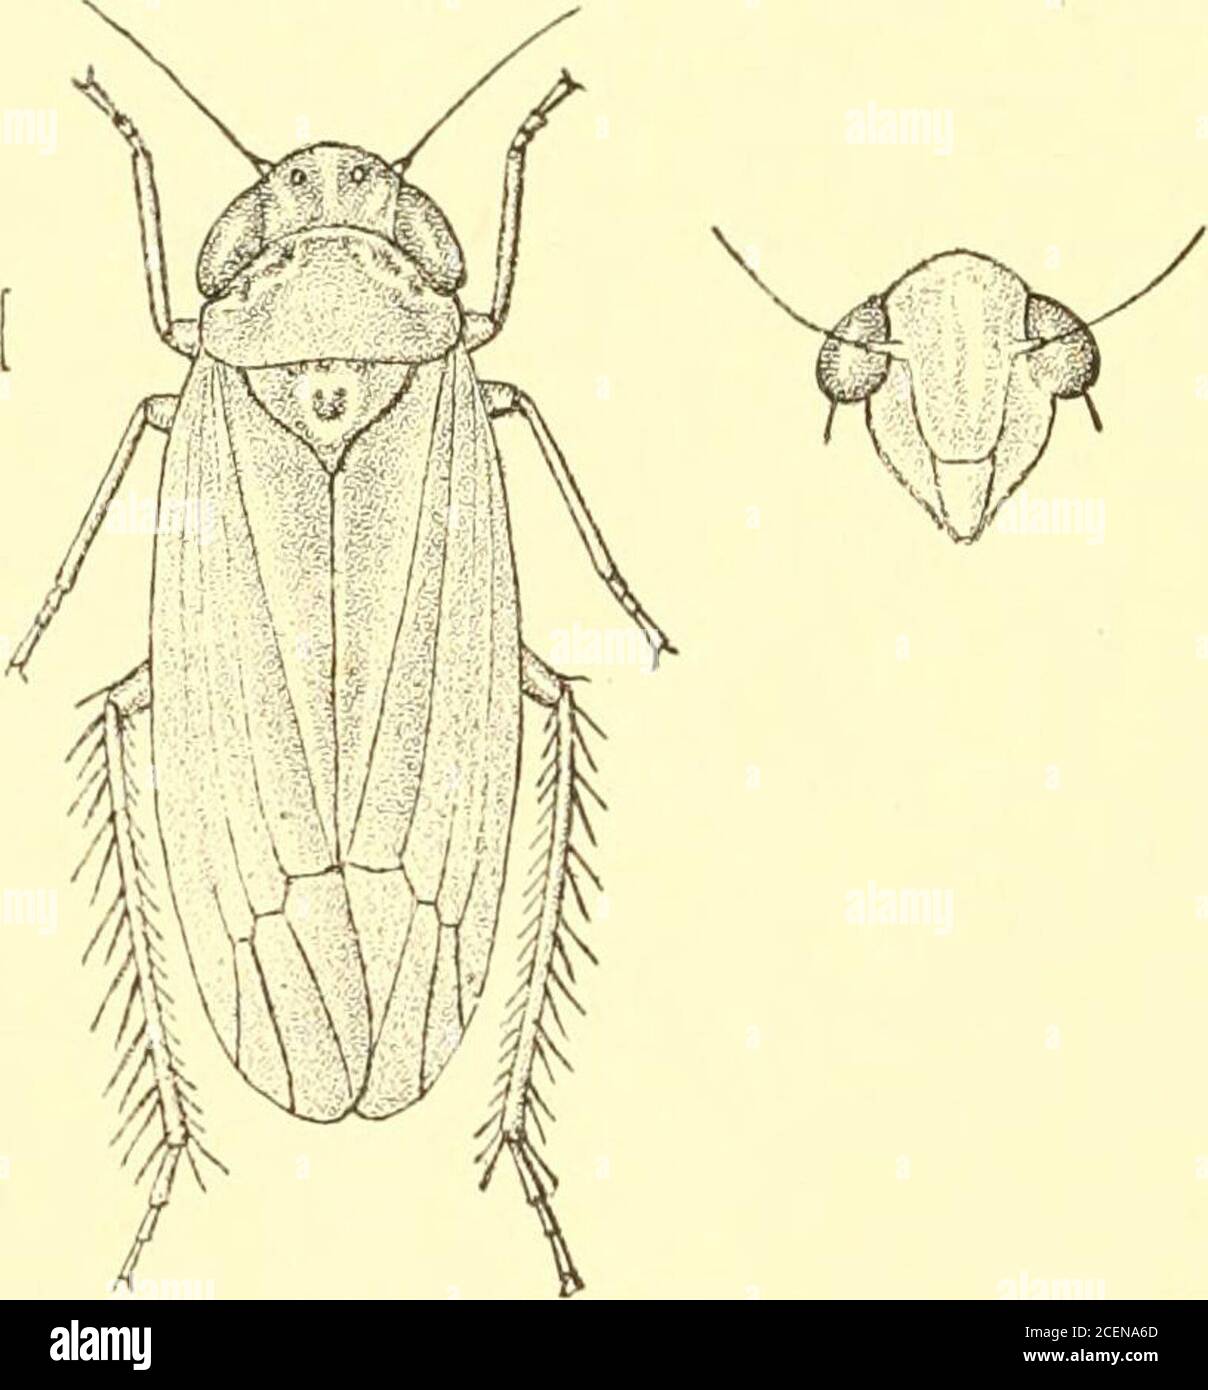 . Rhynchota ... Fig. 249.—Empoasca melichan. above claval area, near apex of clavus a black spot; wings palehyaline ; vertex shorter than breadth between eyes, subangularlyrounded in front; pronotam slightly longer than vertex ; faceunmarked; eyes black, their inner margins pale. Length 3 millim. Hub. Ceylon ; Dikoya (Green). 2674. Empoasca notata, MeJich. Horn. Faun. Cci/lofi, p. 214 (1903).. Fig. 250.—Empoasca notata.. Narrow, greyish-yellow or pale yellow; eyes black ; vertexobtusely angularly produced, with a white middle line in the neck ElIPOASCA. 405 and two obliqne transverse spots on Stock Photo